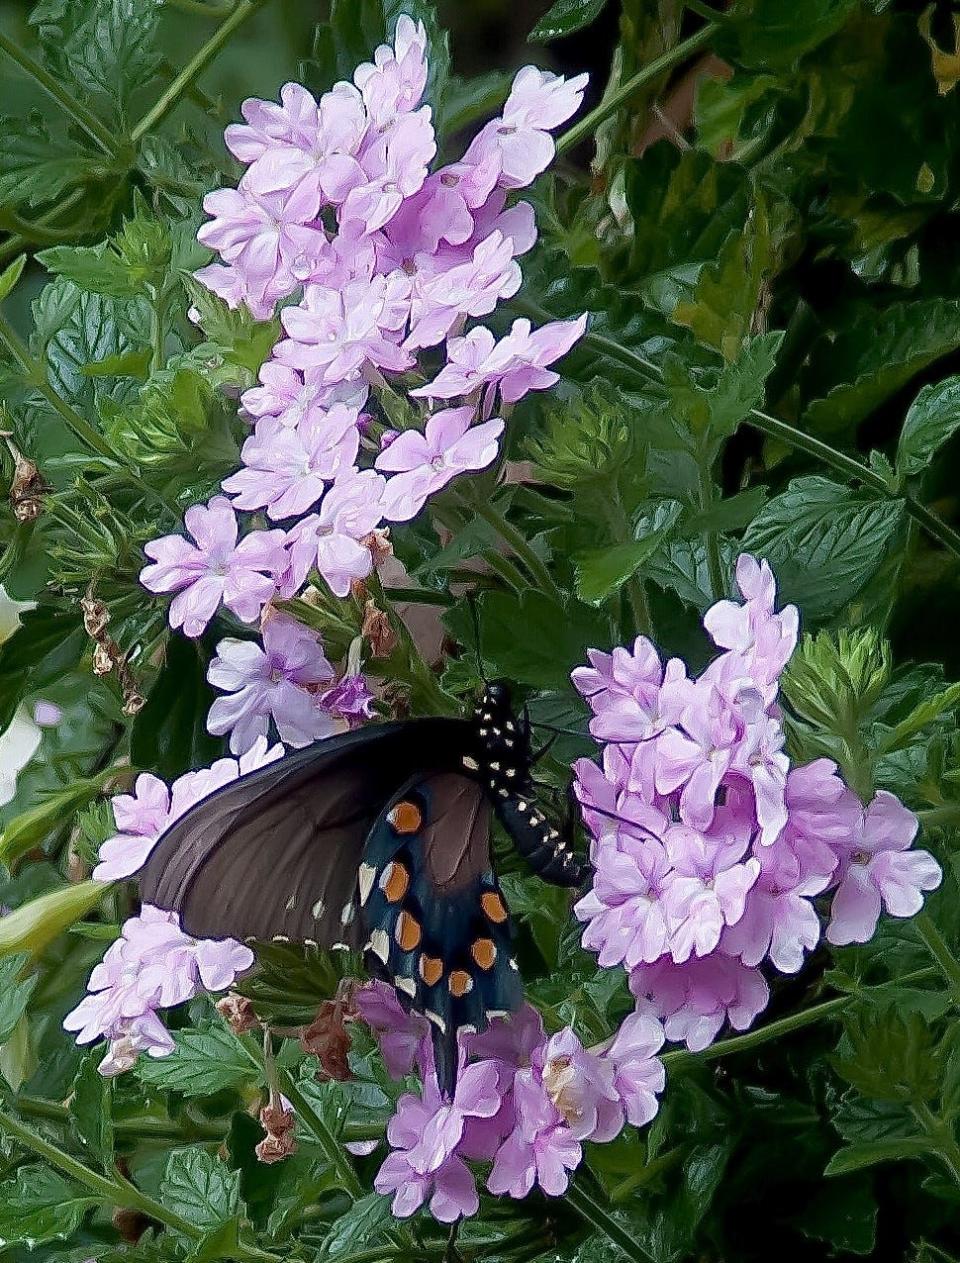 Superbena Pink Cashmere verbena brought in this Pipevine Swallowtail in September making it a trifecta as it had already played host to Eastern Tiger Swallowtails and Spicebush Swallowtails.